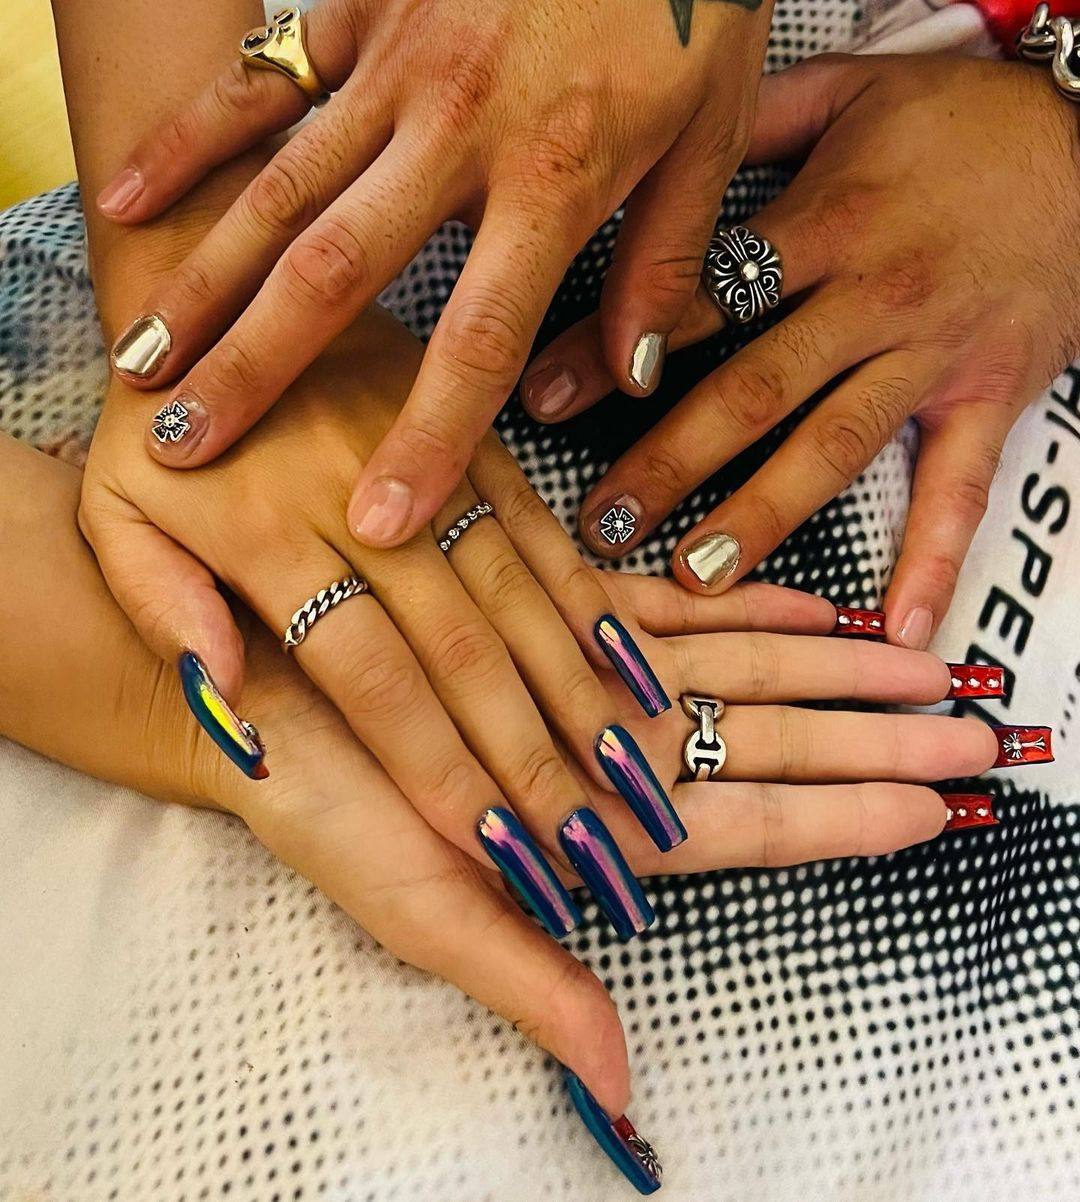 6 Nail Trends That Are Going to Be Huge in 2023